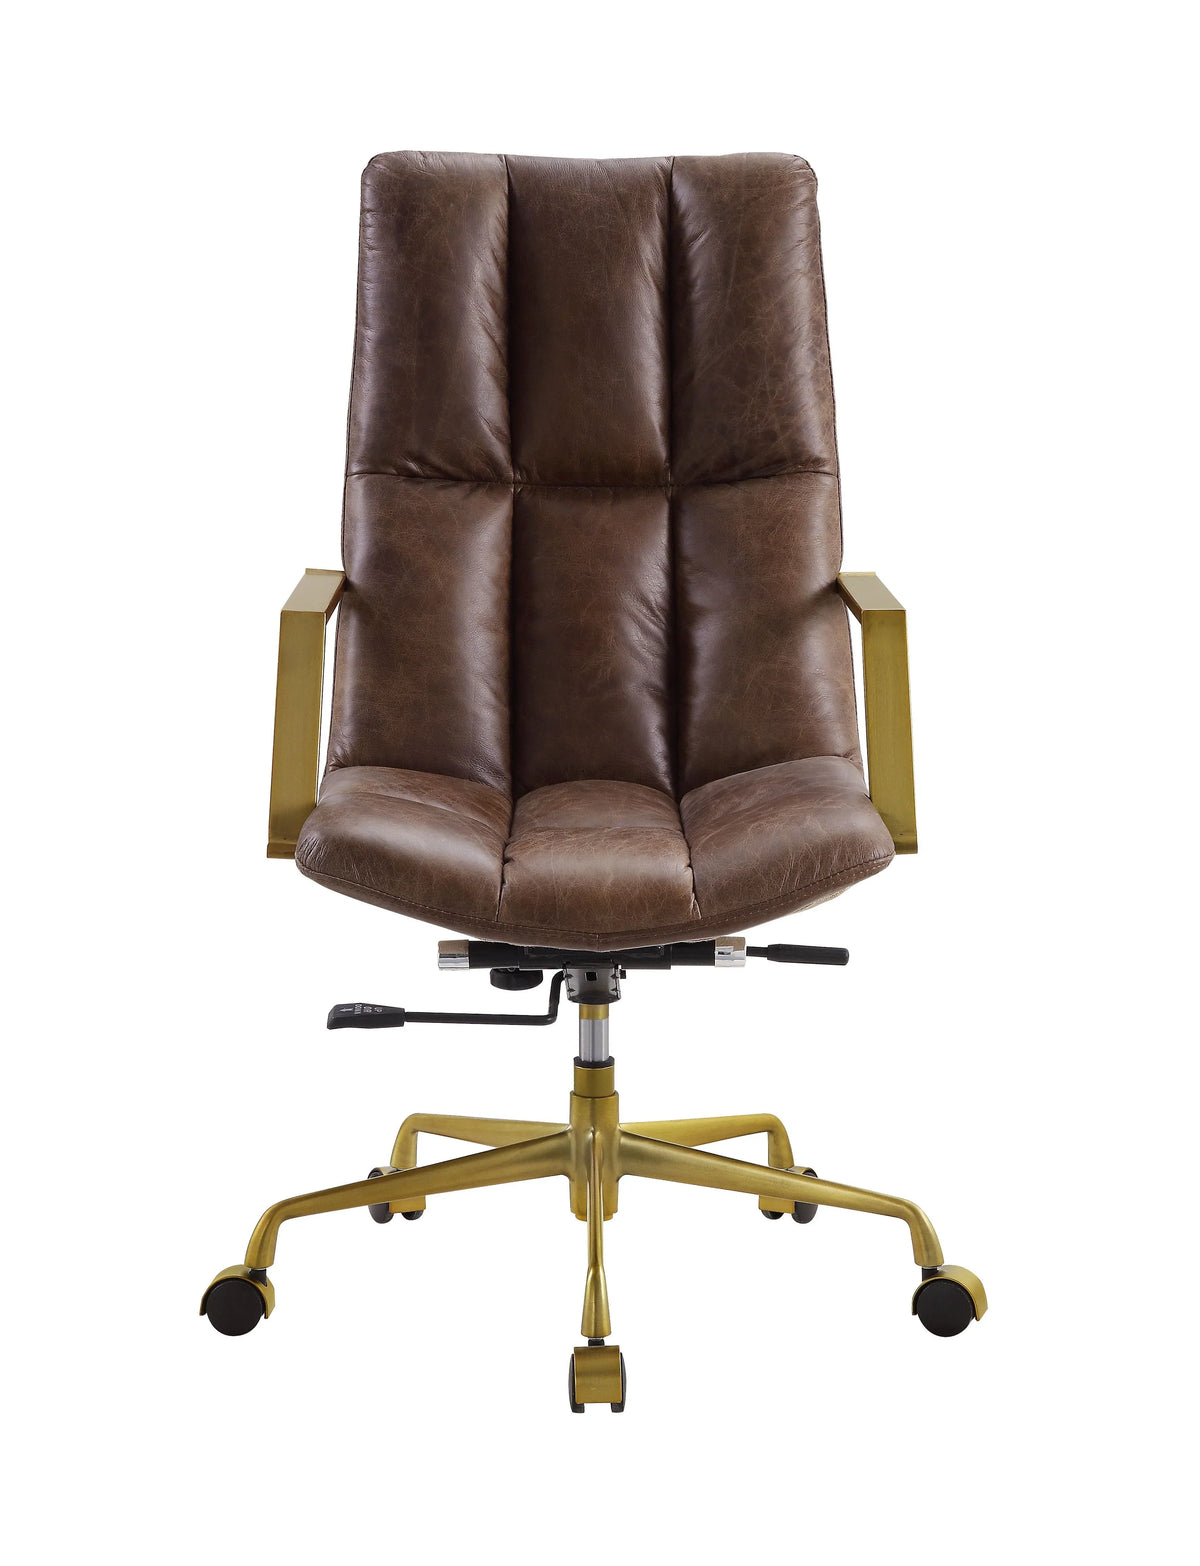 Rolento Espresso Top Grain Leather Executive Office Chair Model 92494 By ACME Furniture